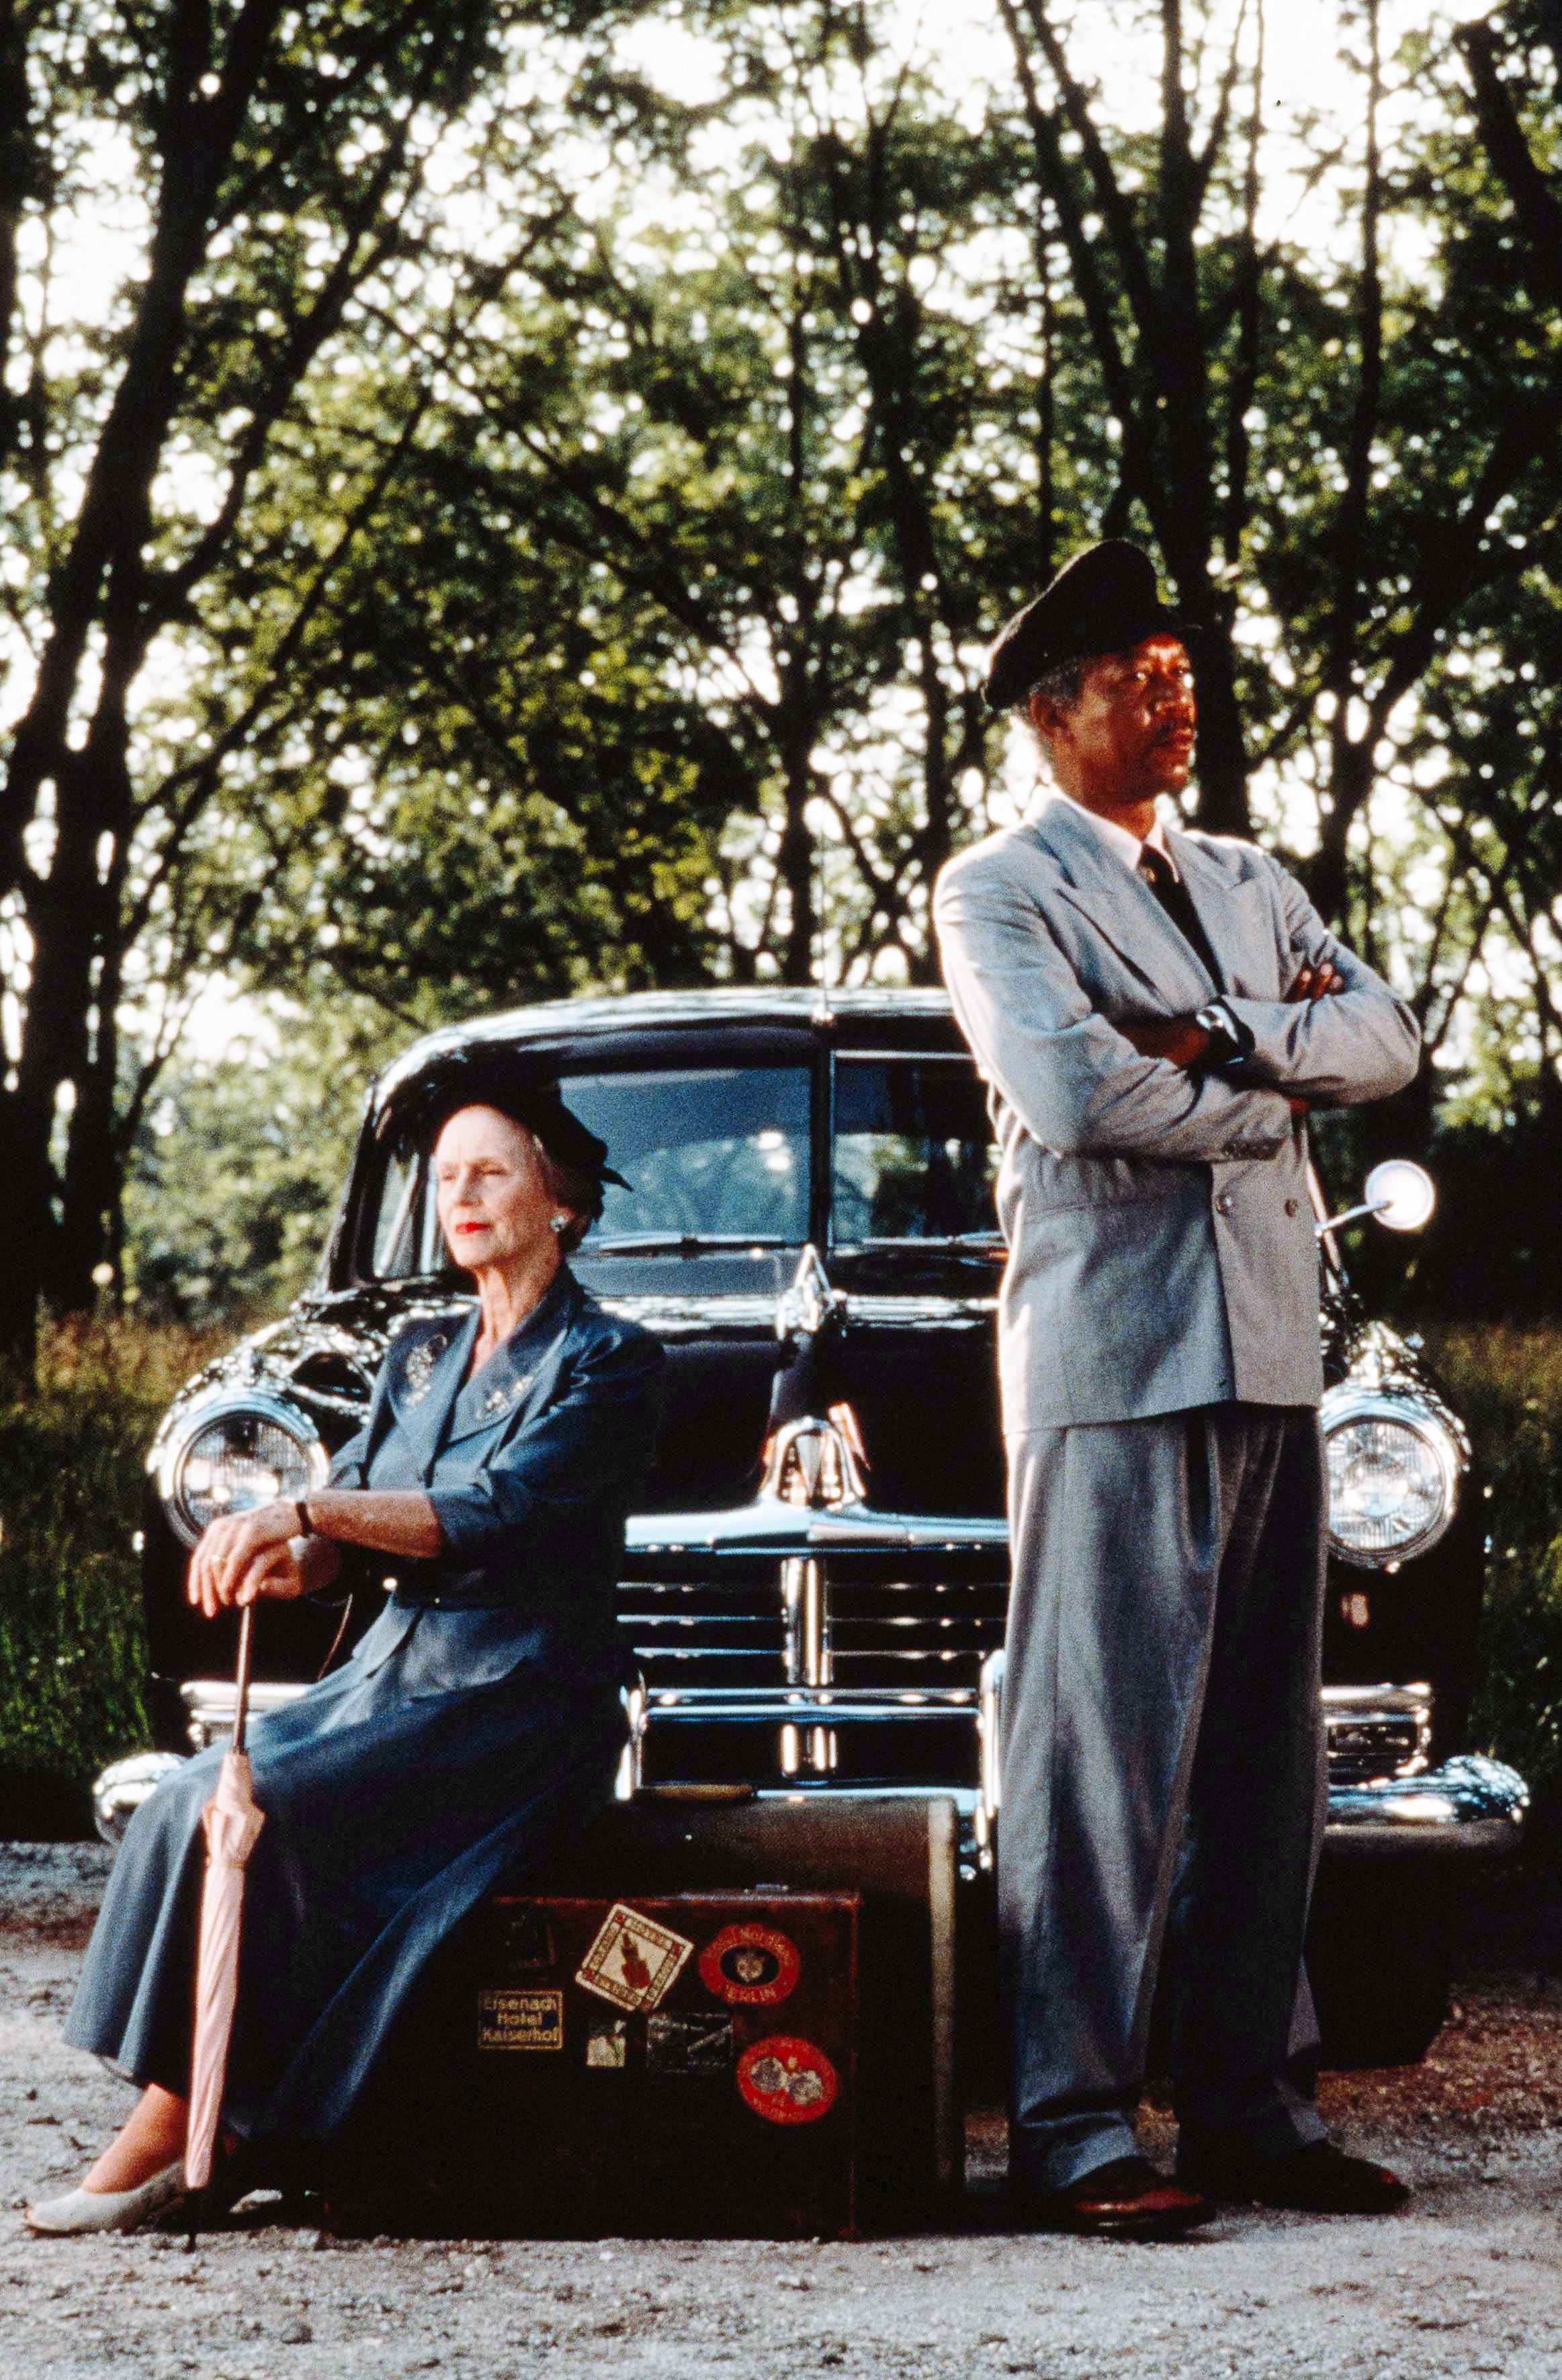 Jessica Tandy as Daisy seated with cane beside standing Morgan Freeman as Hoke Colburn in suit, with a 1940s car behind, in a rural setting